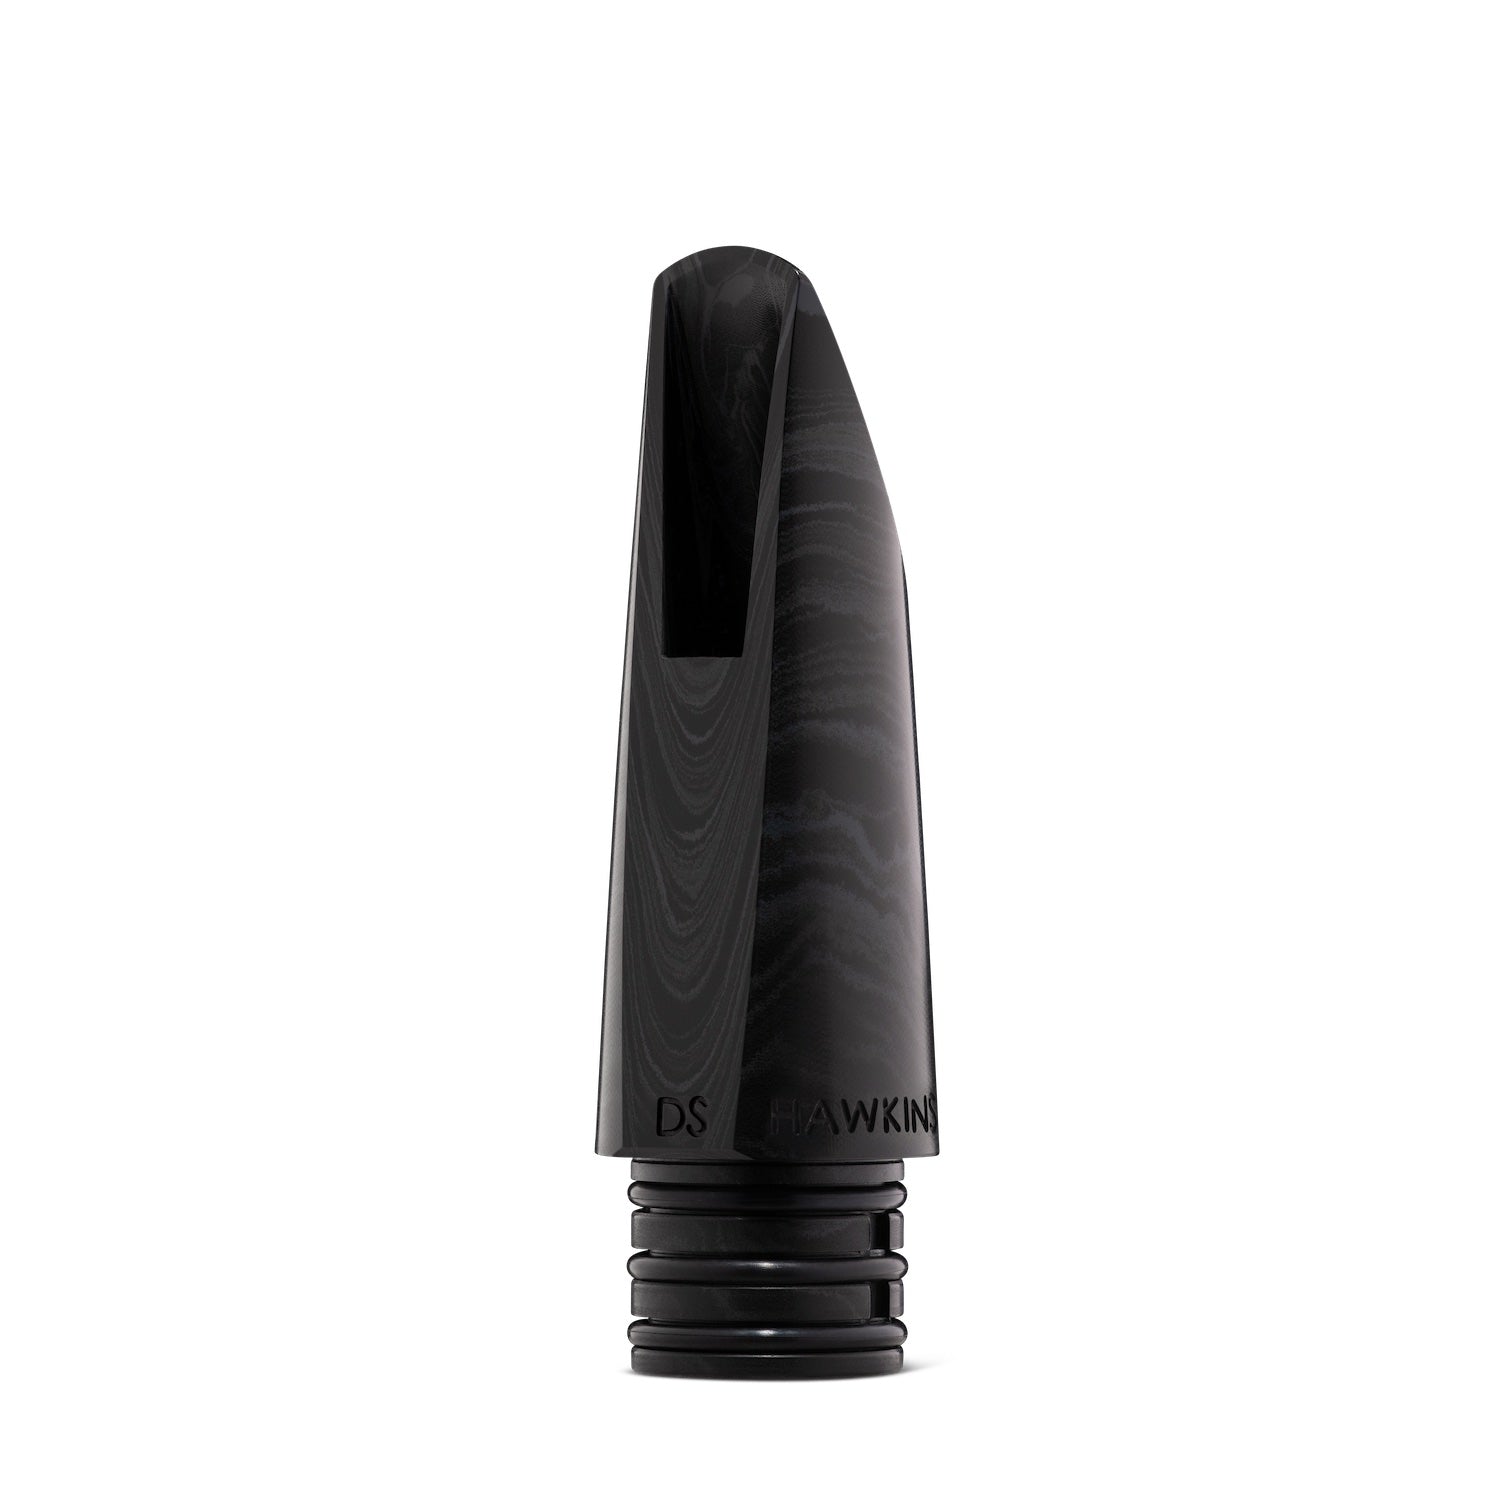 backun-bb-clarinet-vocalise-shifrin-signature-series-mouthpiece-side-2